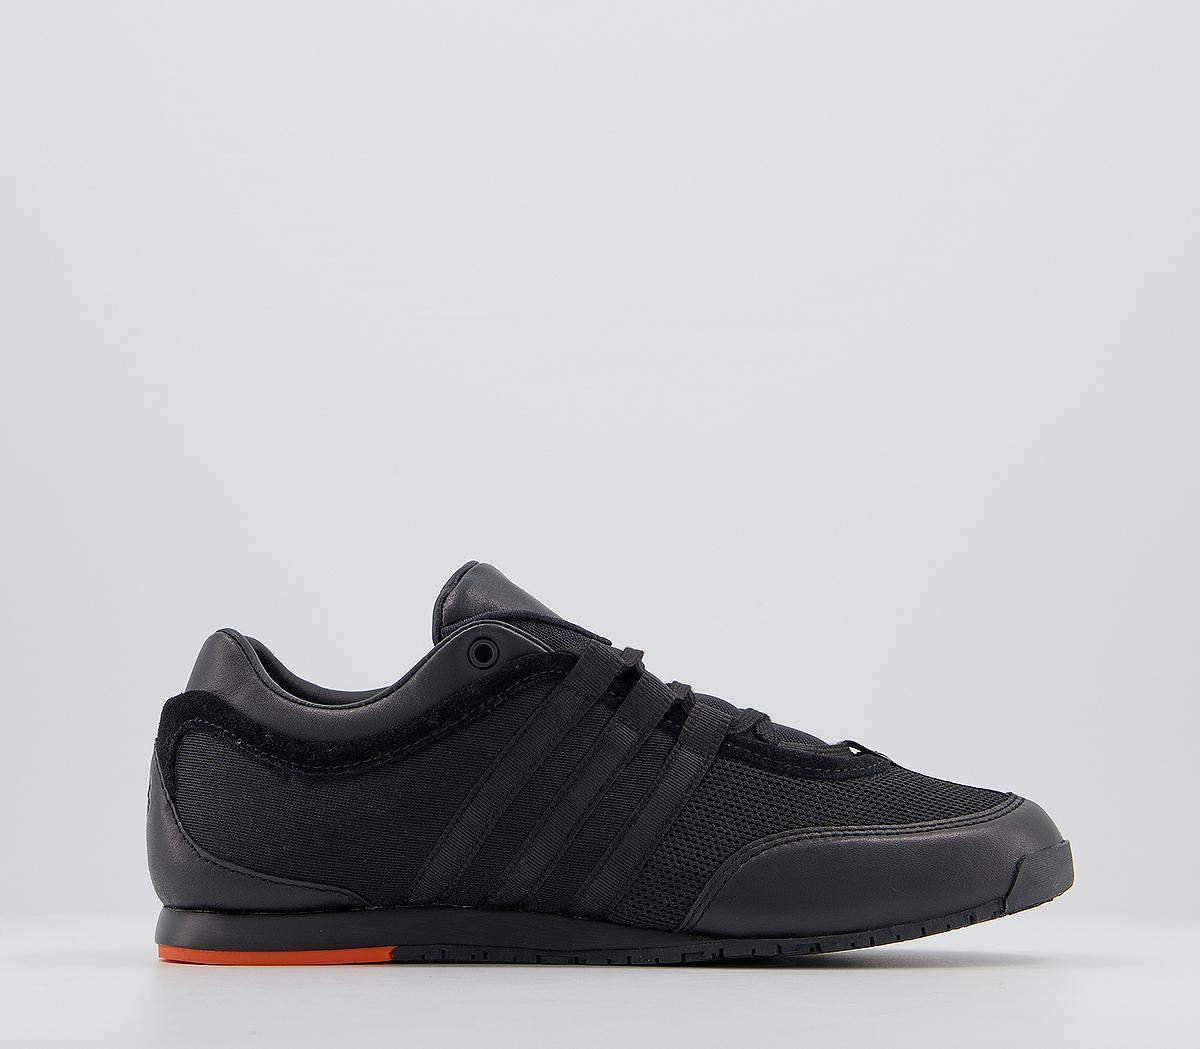 y3 boxing trainers black and orange